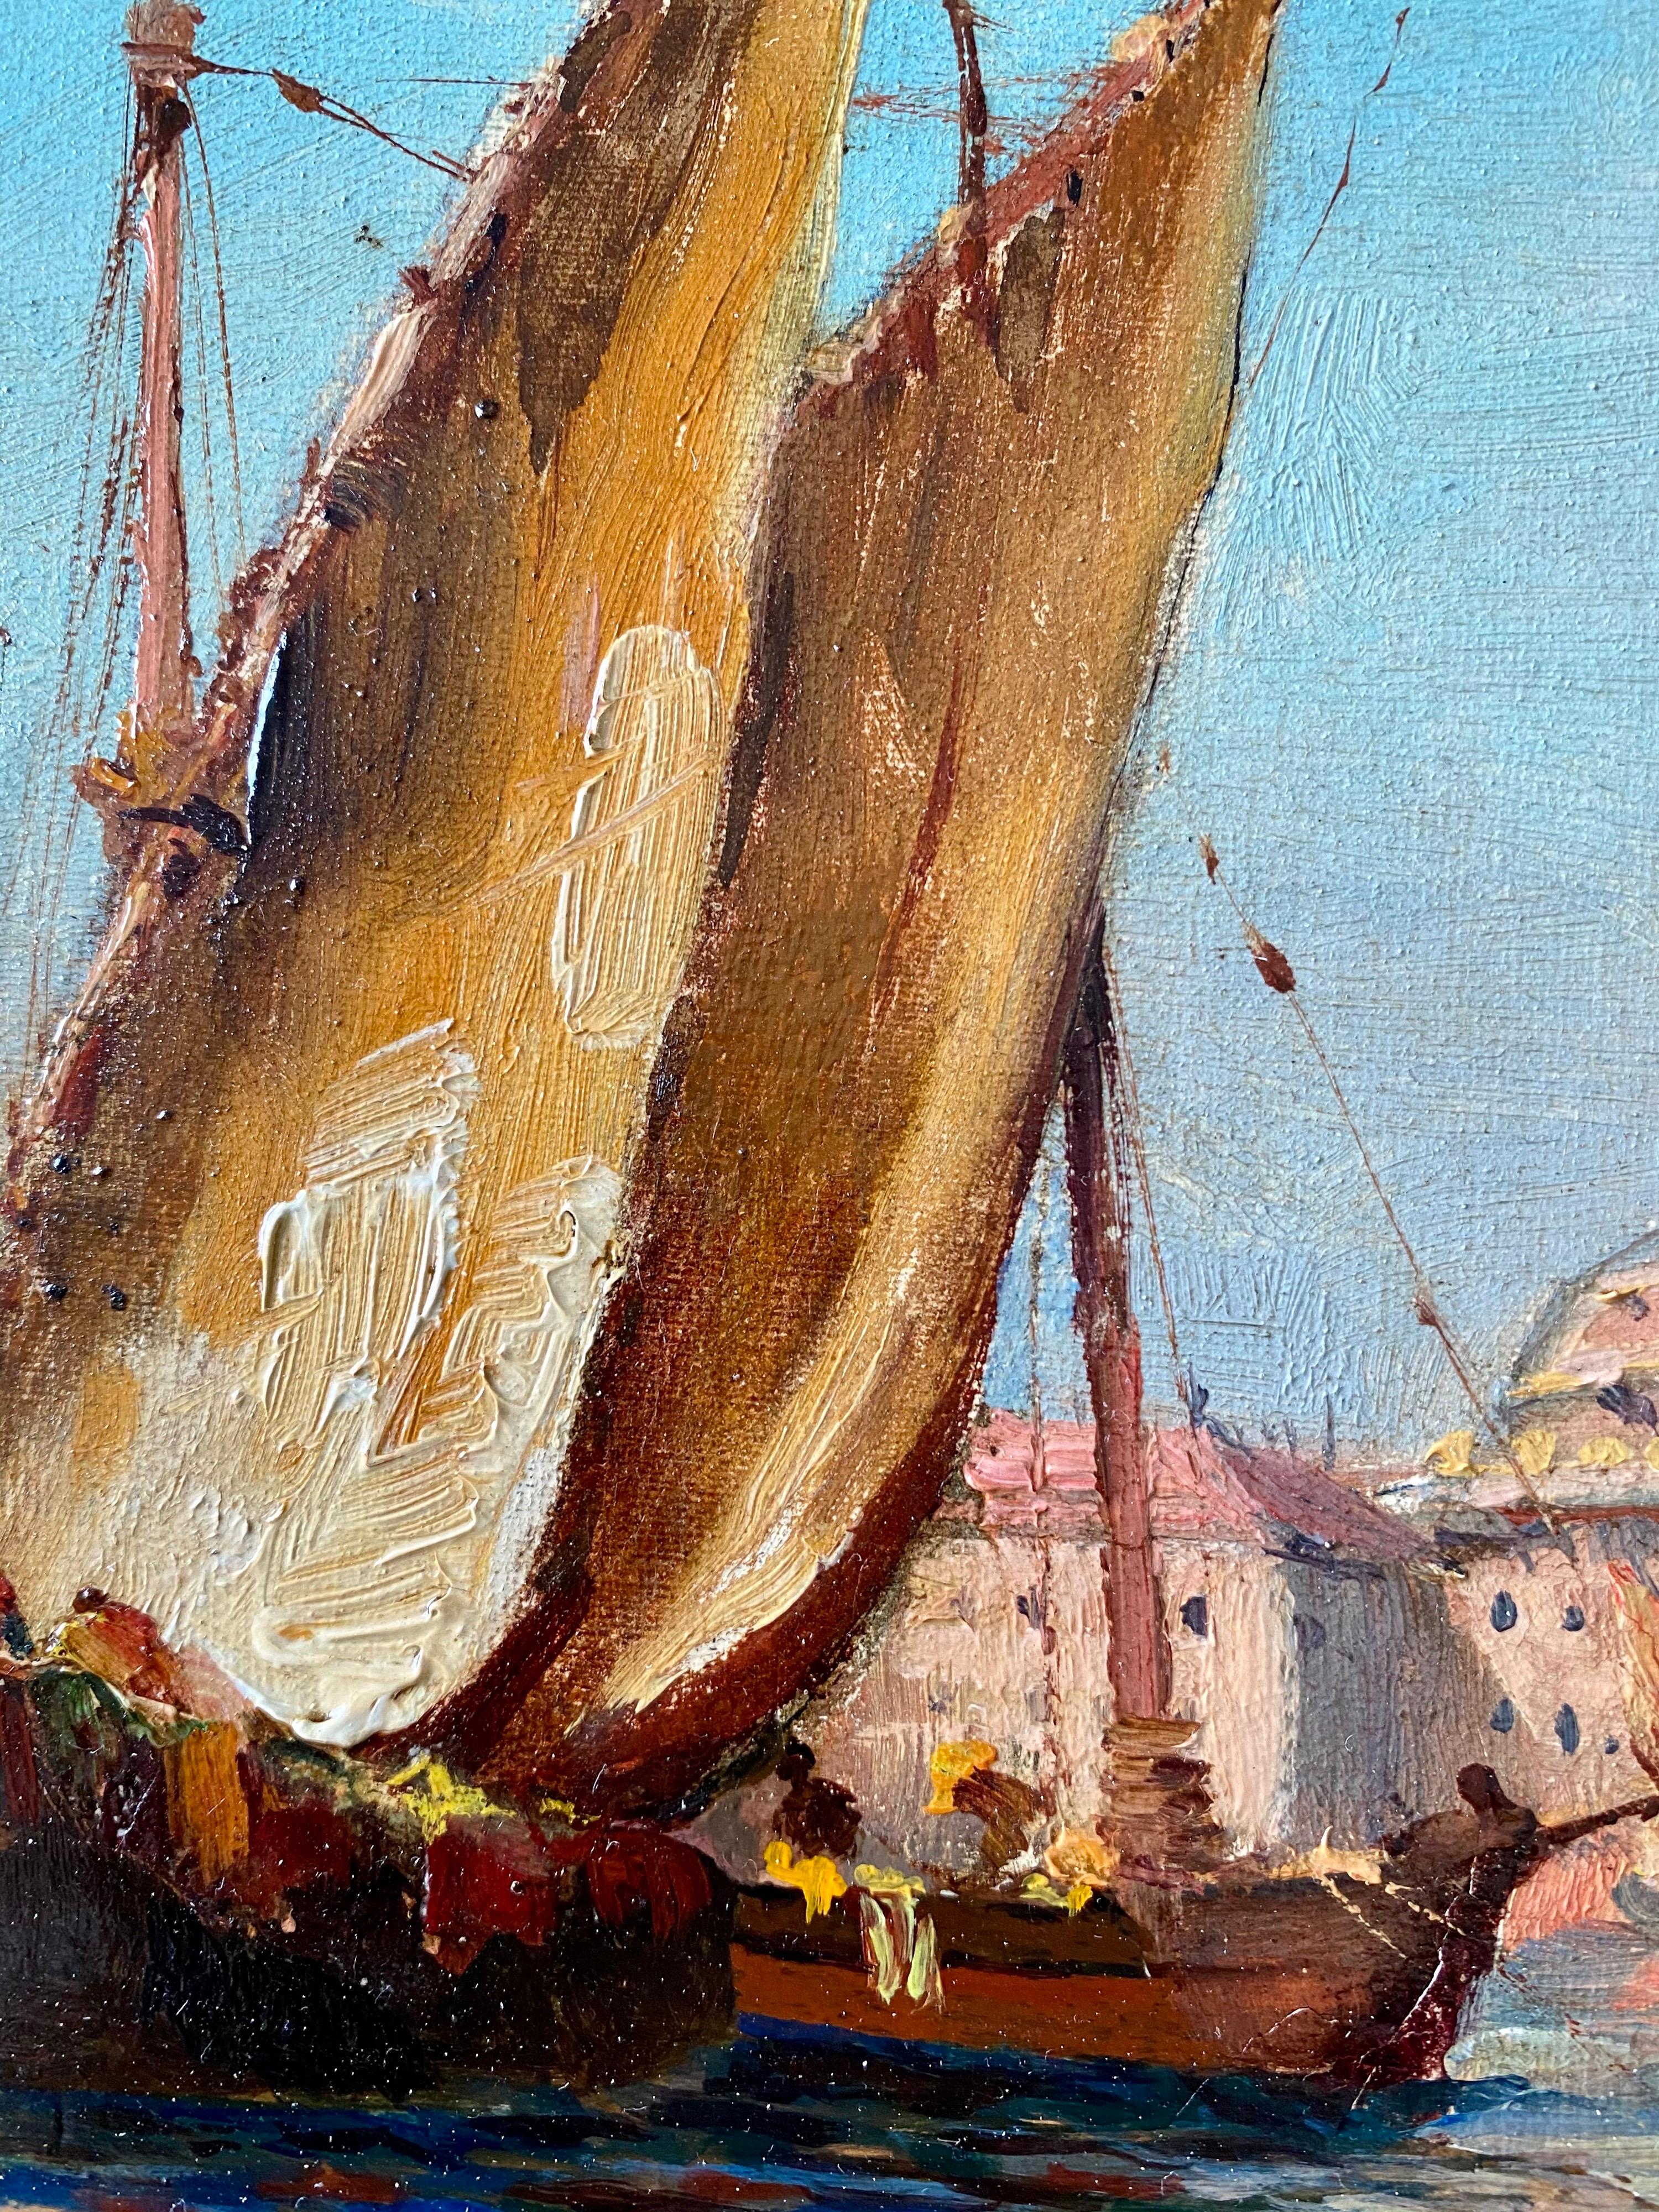 19th century French impressionist painting - View of Venice - Cityscape Boat 2